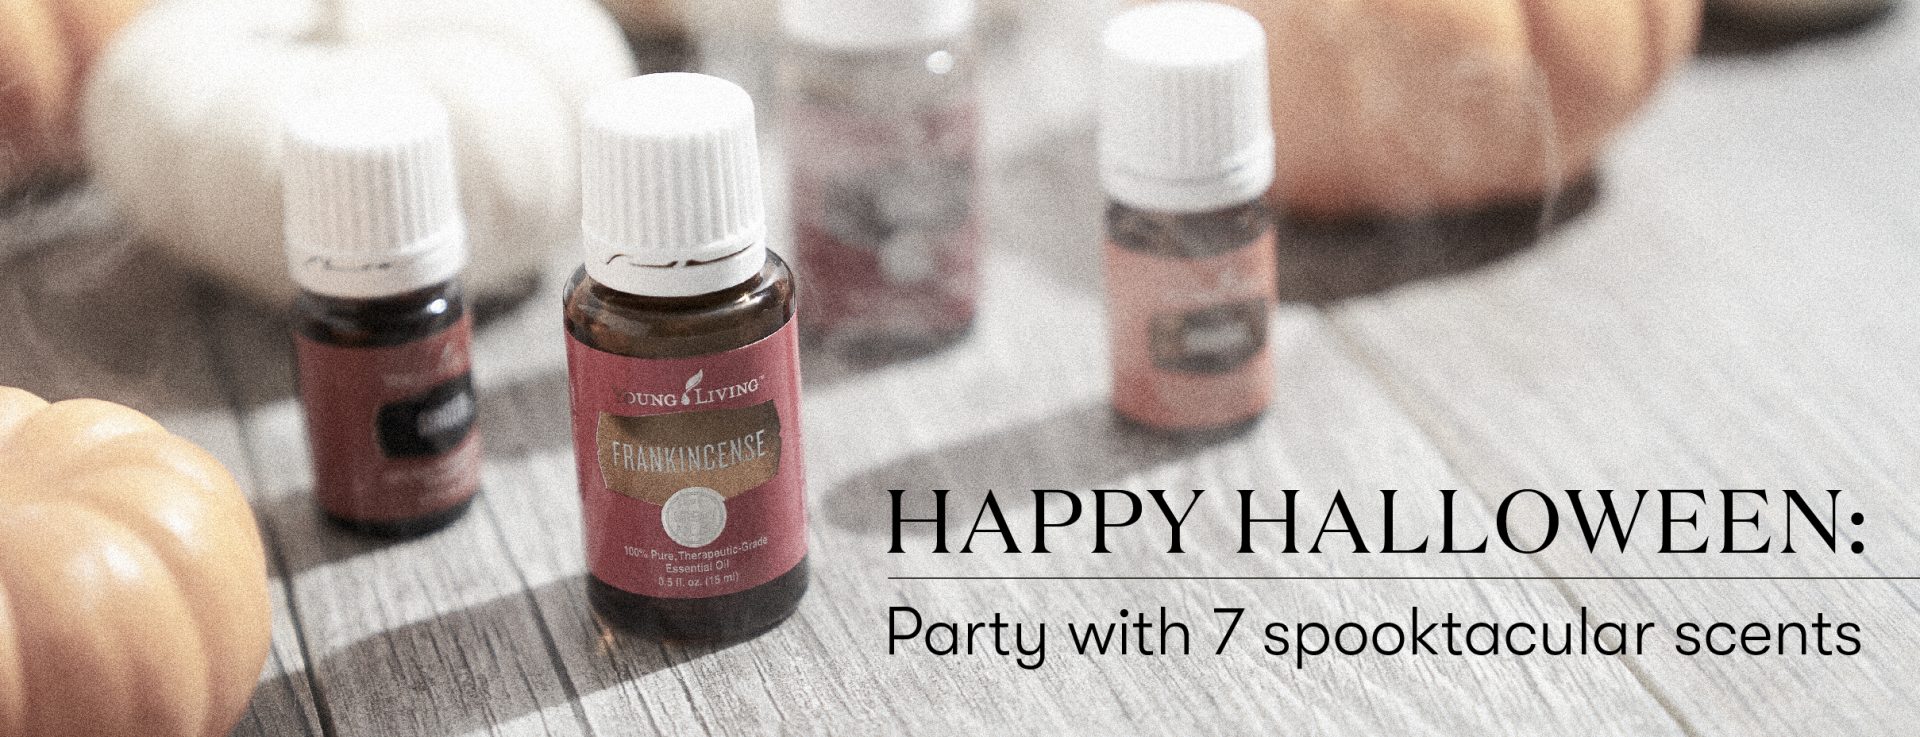 Happy Halloween Party with 7 spooktacular scents